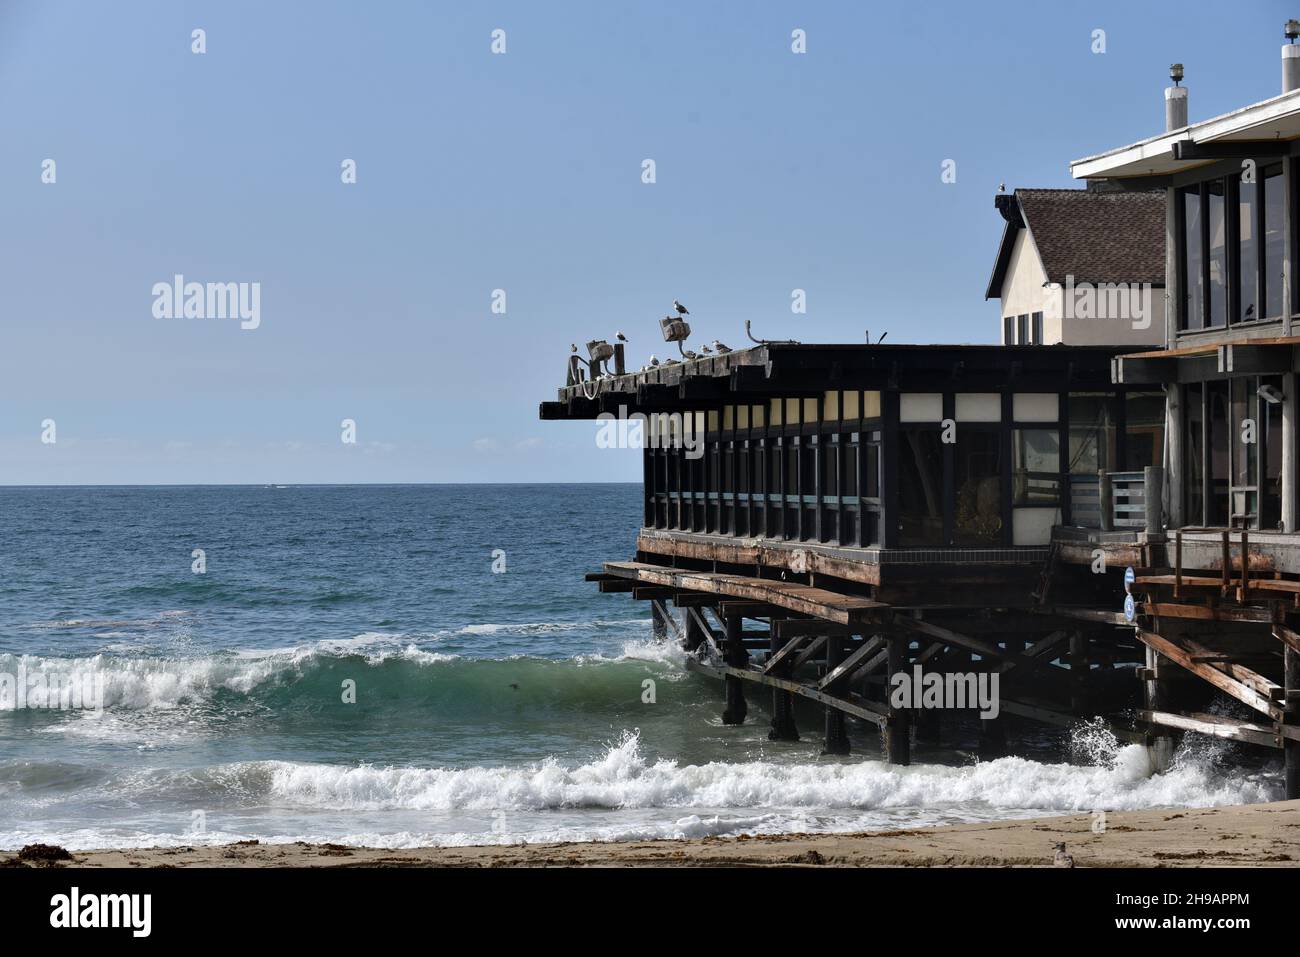 Waves breaking alongside an old rustic pier at a tropical resort Stock Photo